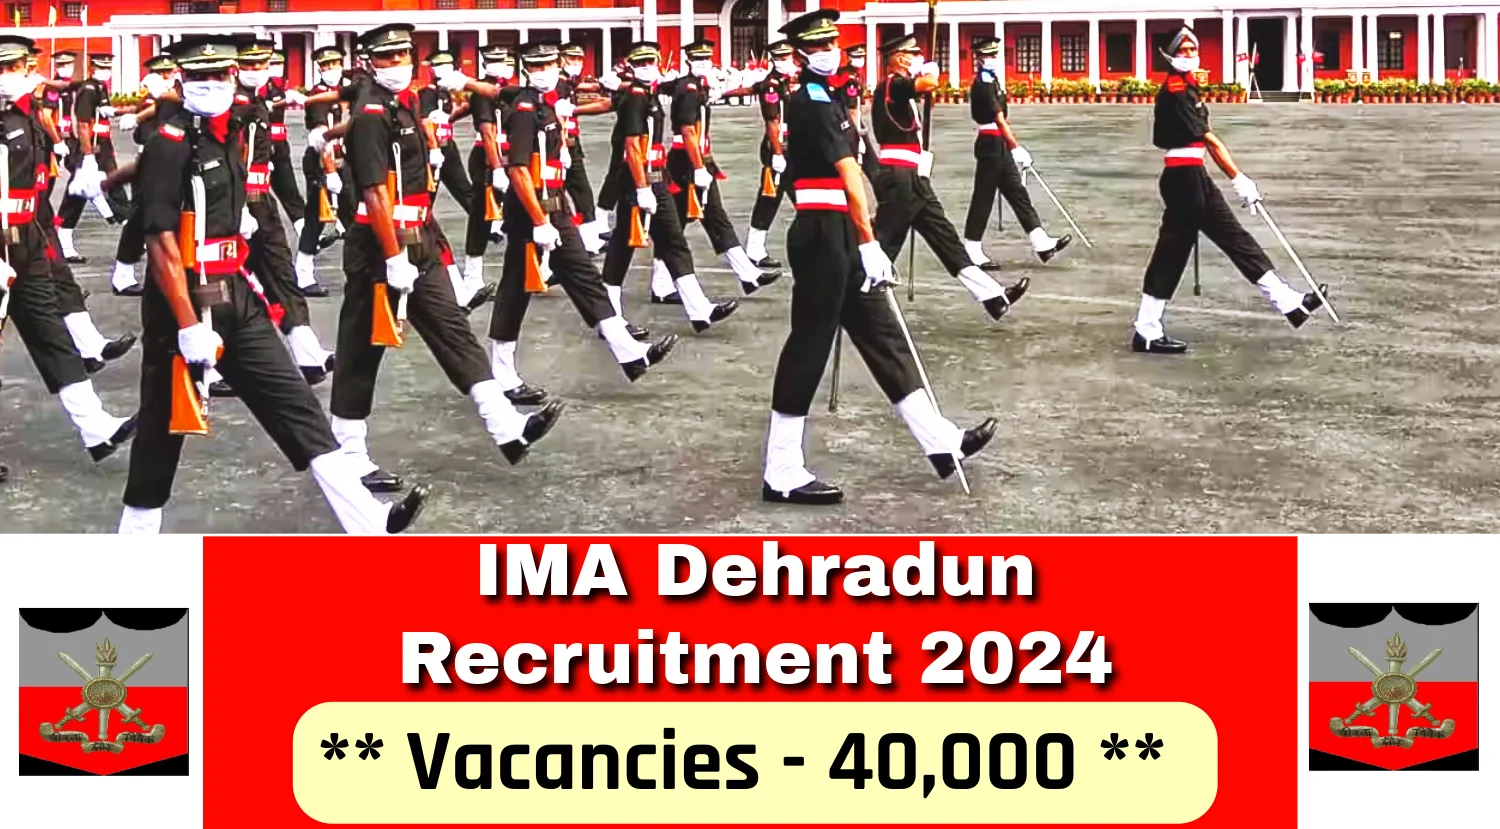 IMA Dehradun Recruitment 2024 for Various Vacancies, Check Eligibility and How to Apply